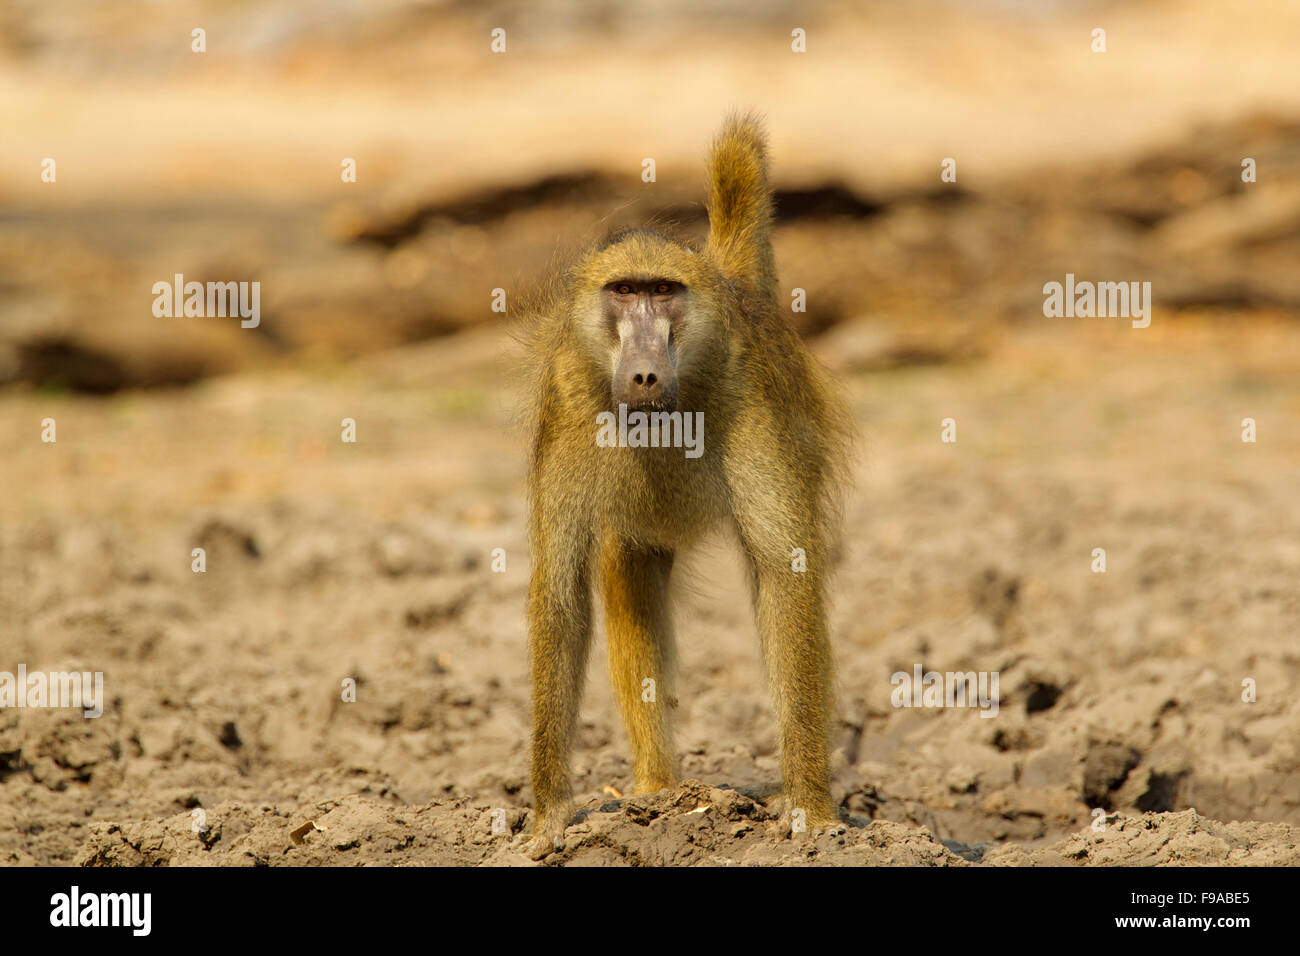 A baboon standing on all fours looking at the camera, Mana Pools Zimbabwe Stock Photo